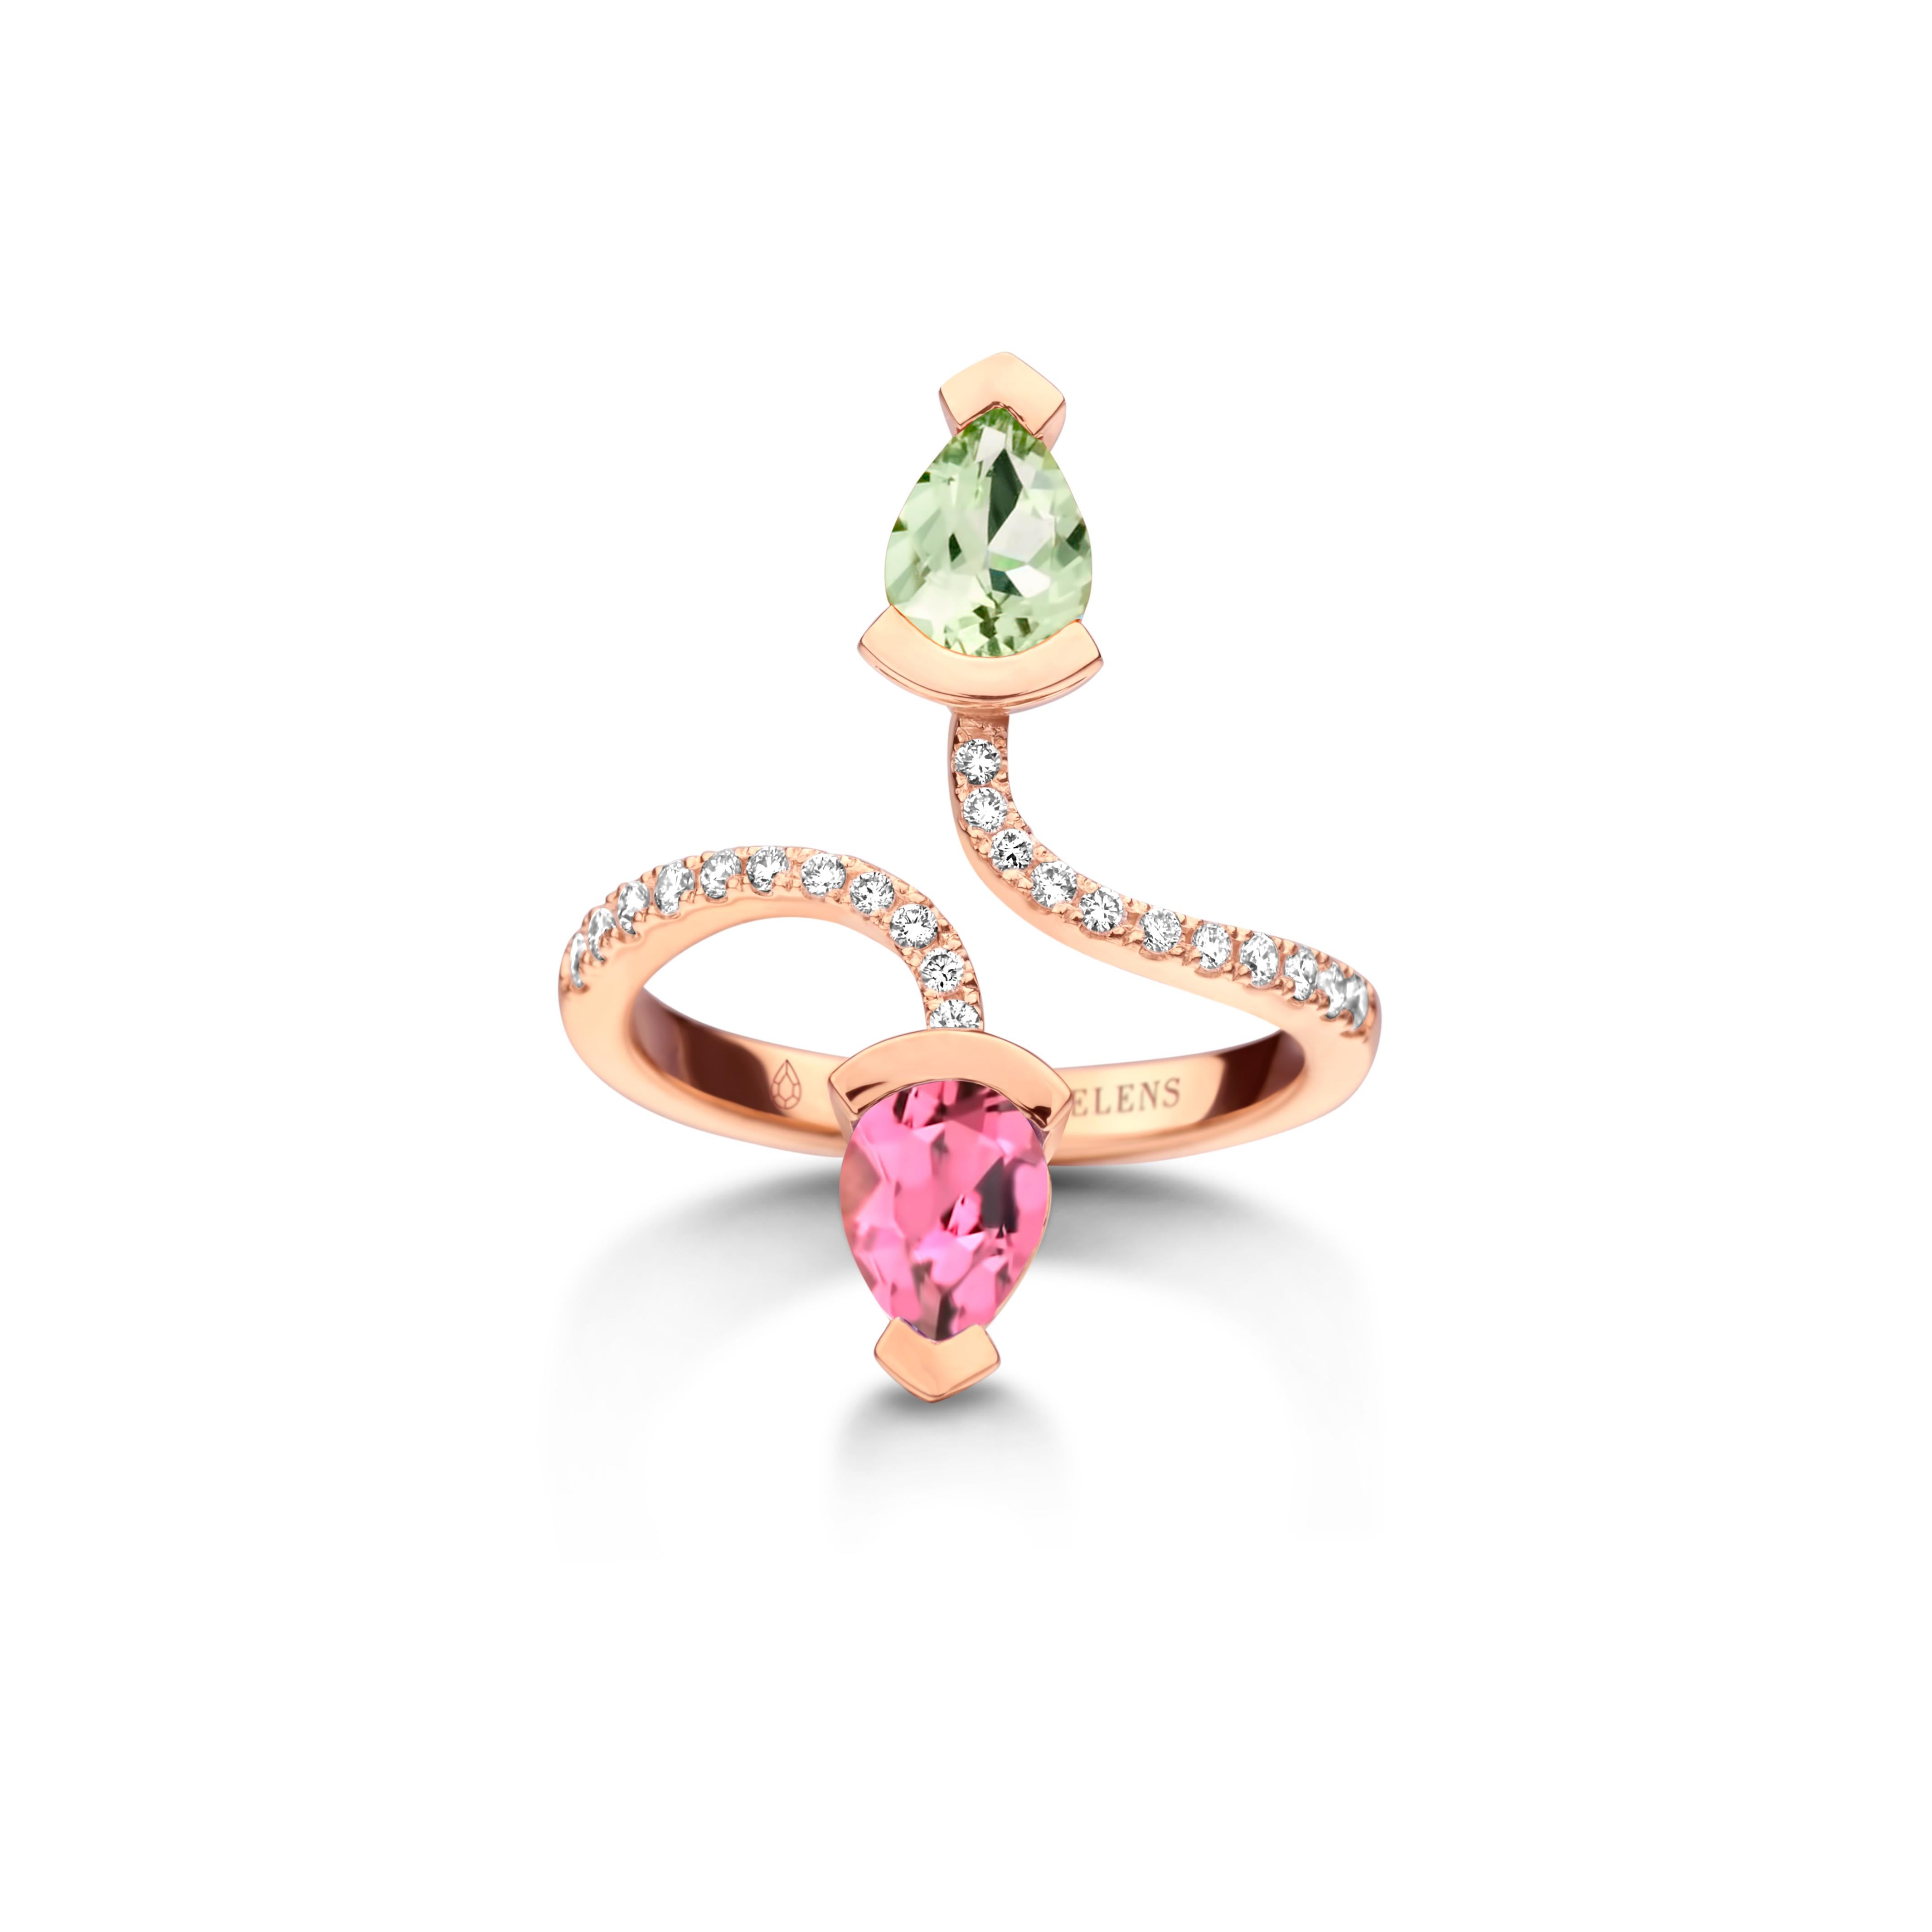 Adeline Duo ring in 18Kt yellow gold 5g set with a pear-shaped green beryl 0,70 Ct, a pear-shaped pink tourmaline 0,70 Ct and 0,19 Ct of white brilliant cut diamonds - VS F quality. Celine Roelens, a goldsmith and gemologist, is specialized in